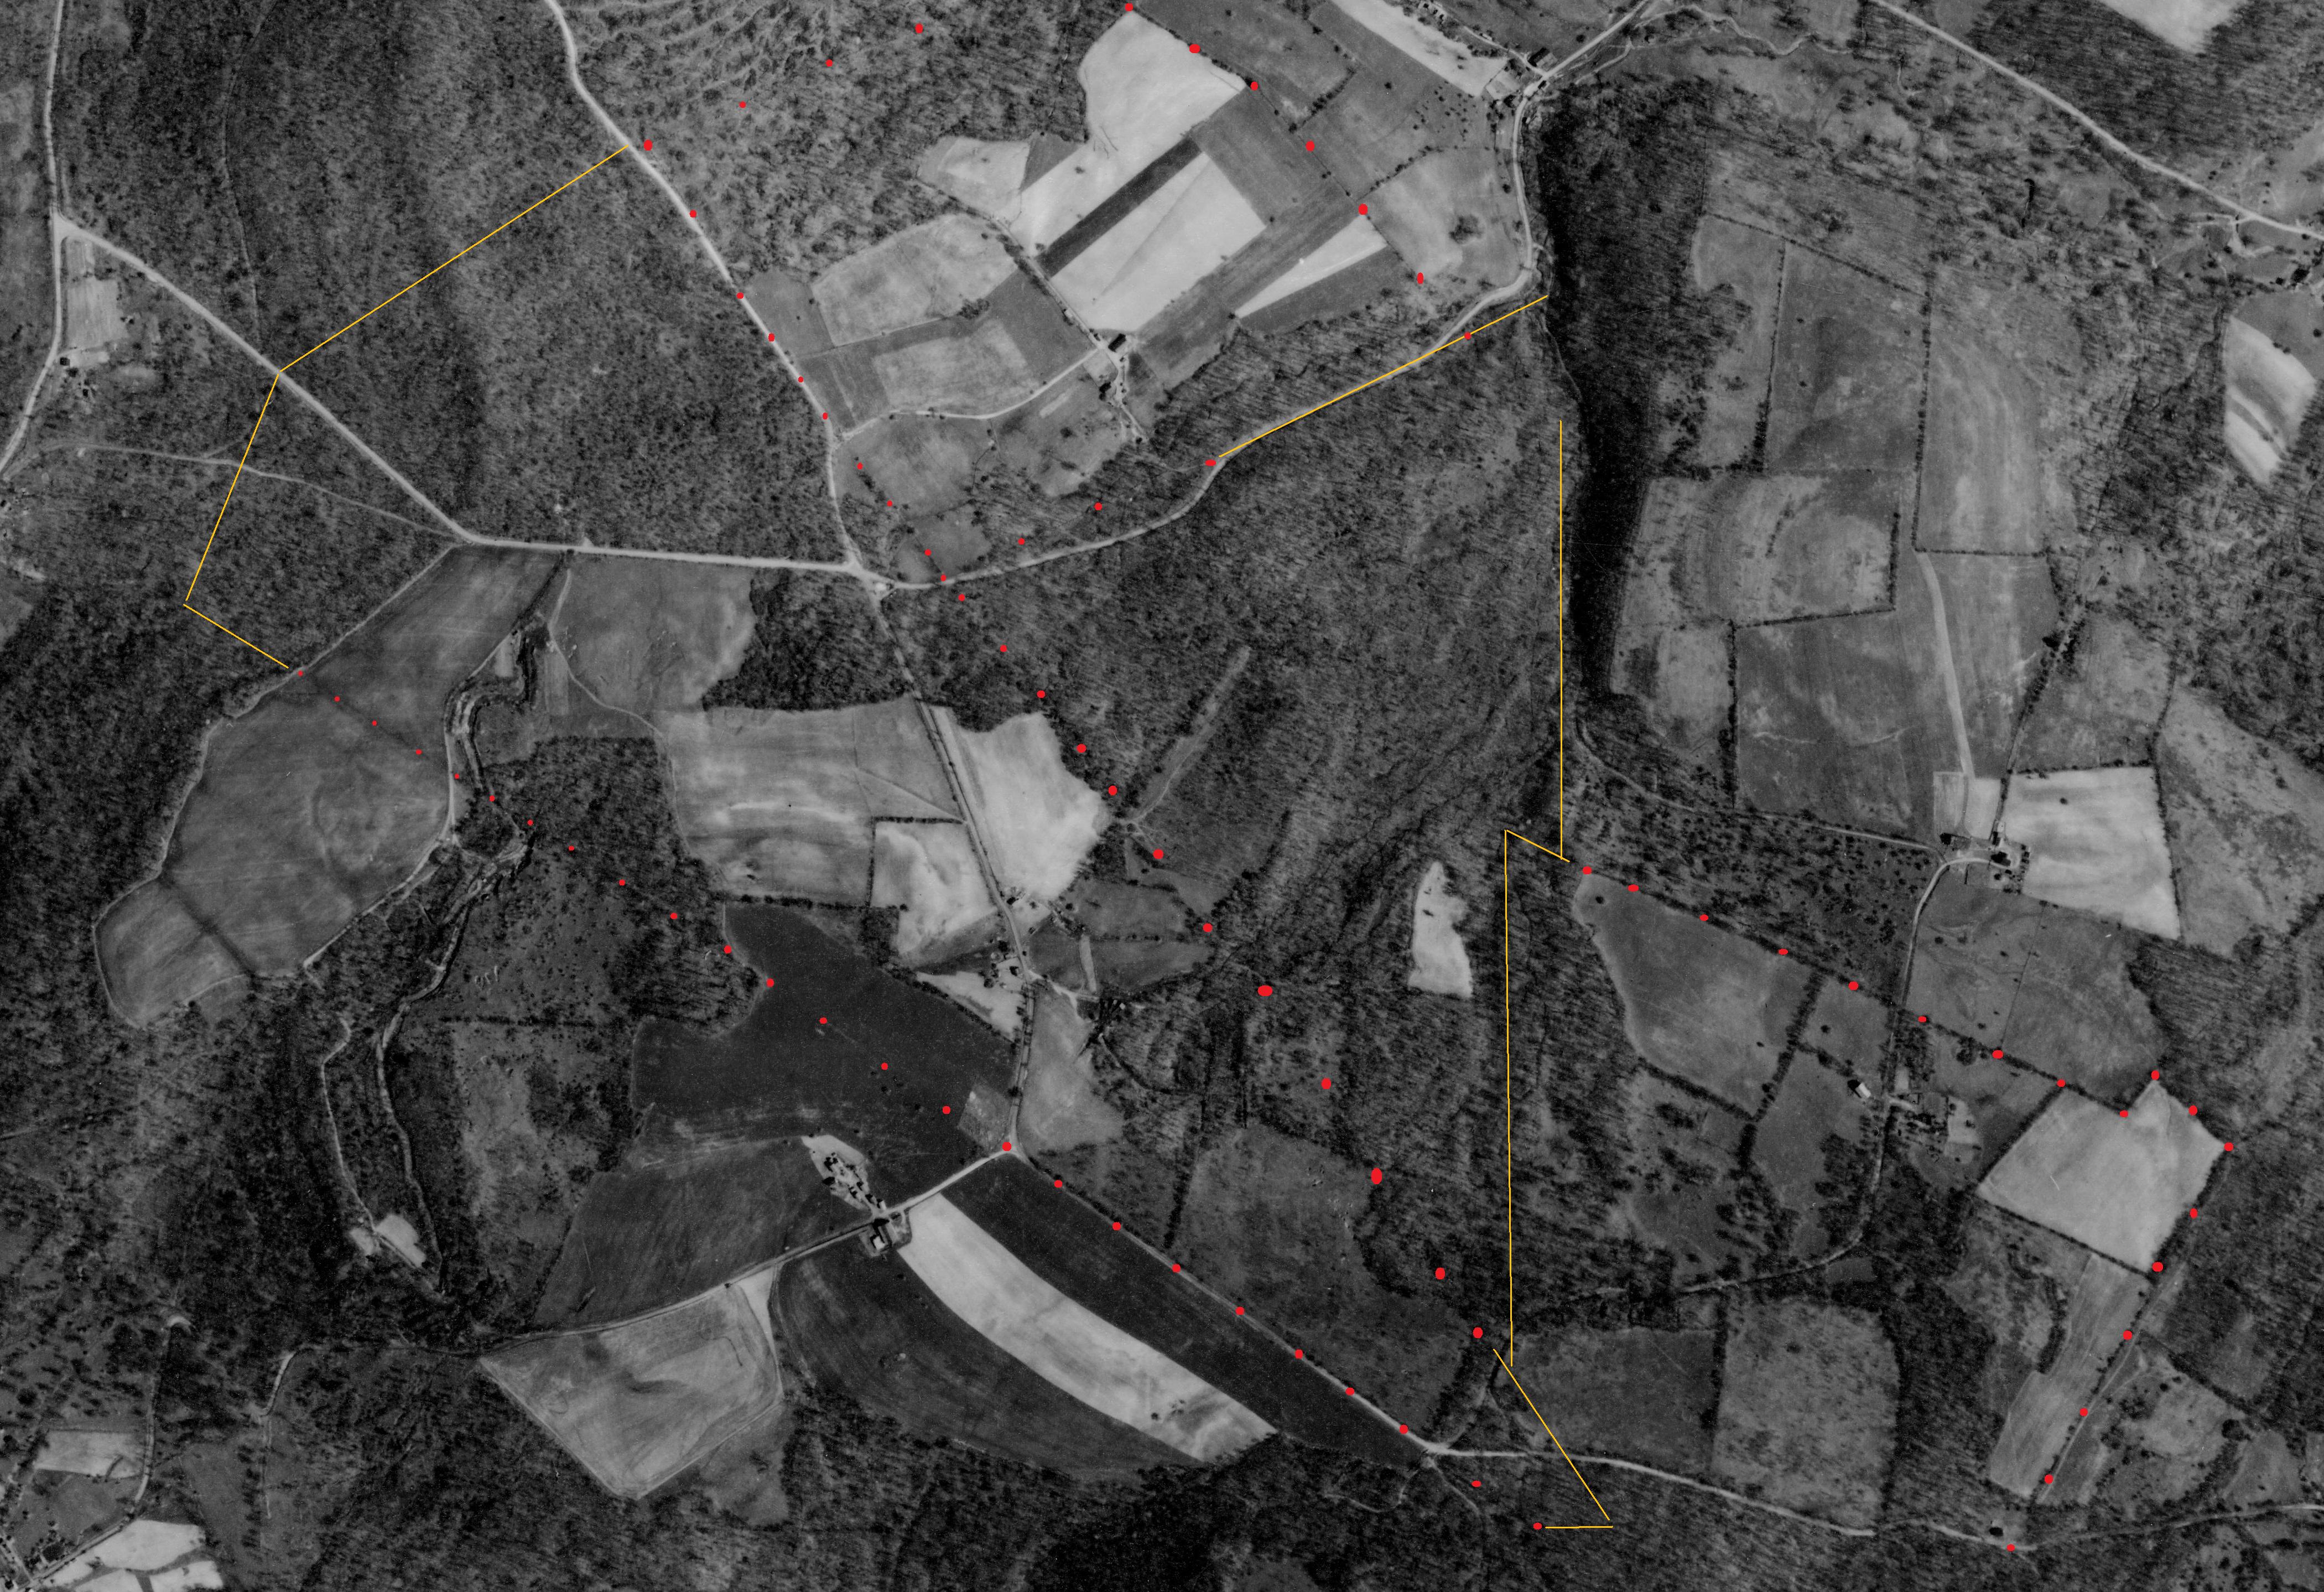 1939 aerial photo, showing some 1829 property boundaries.